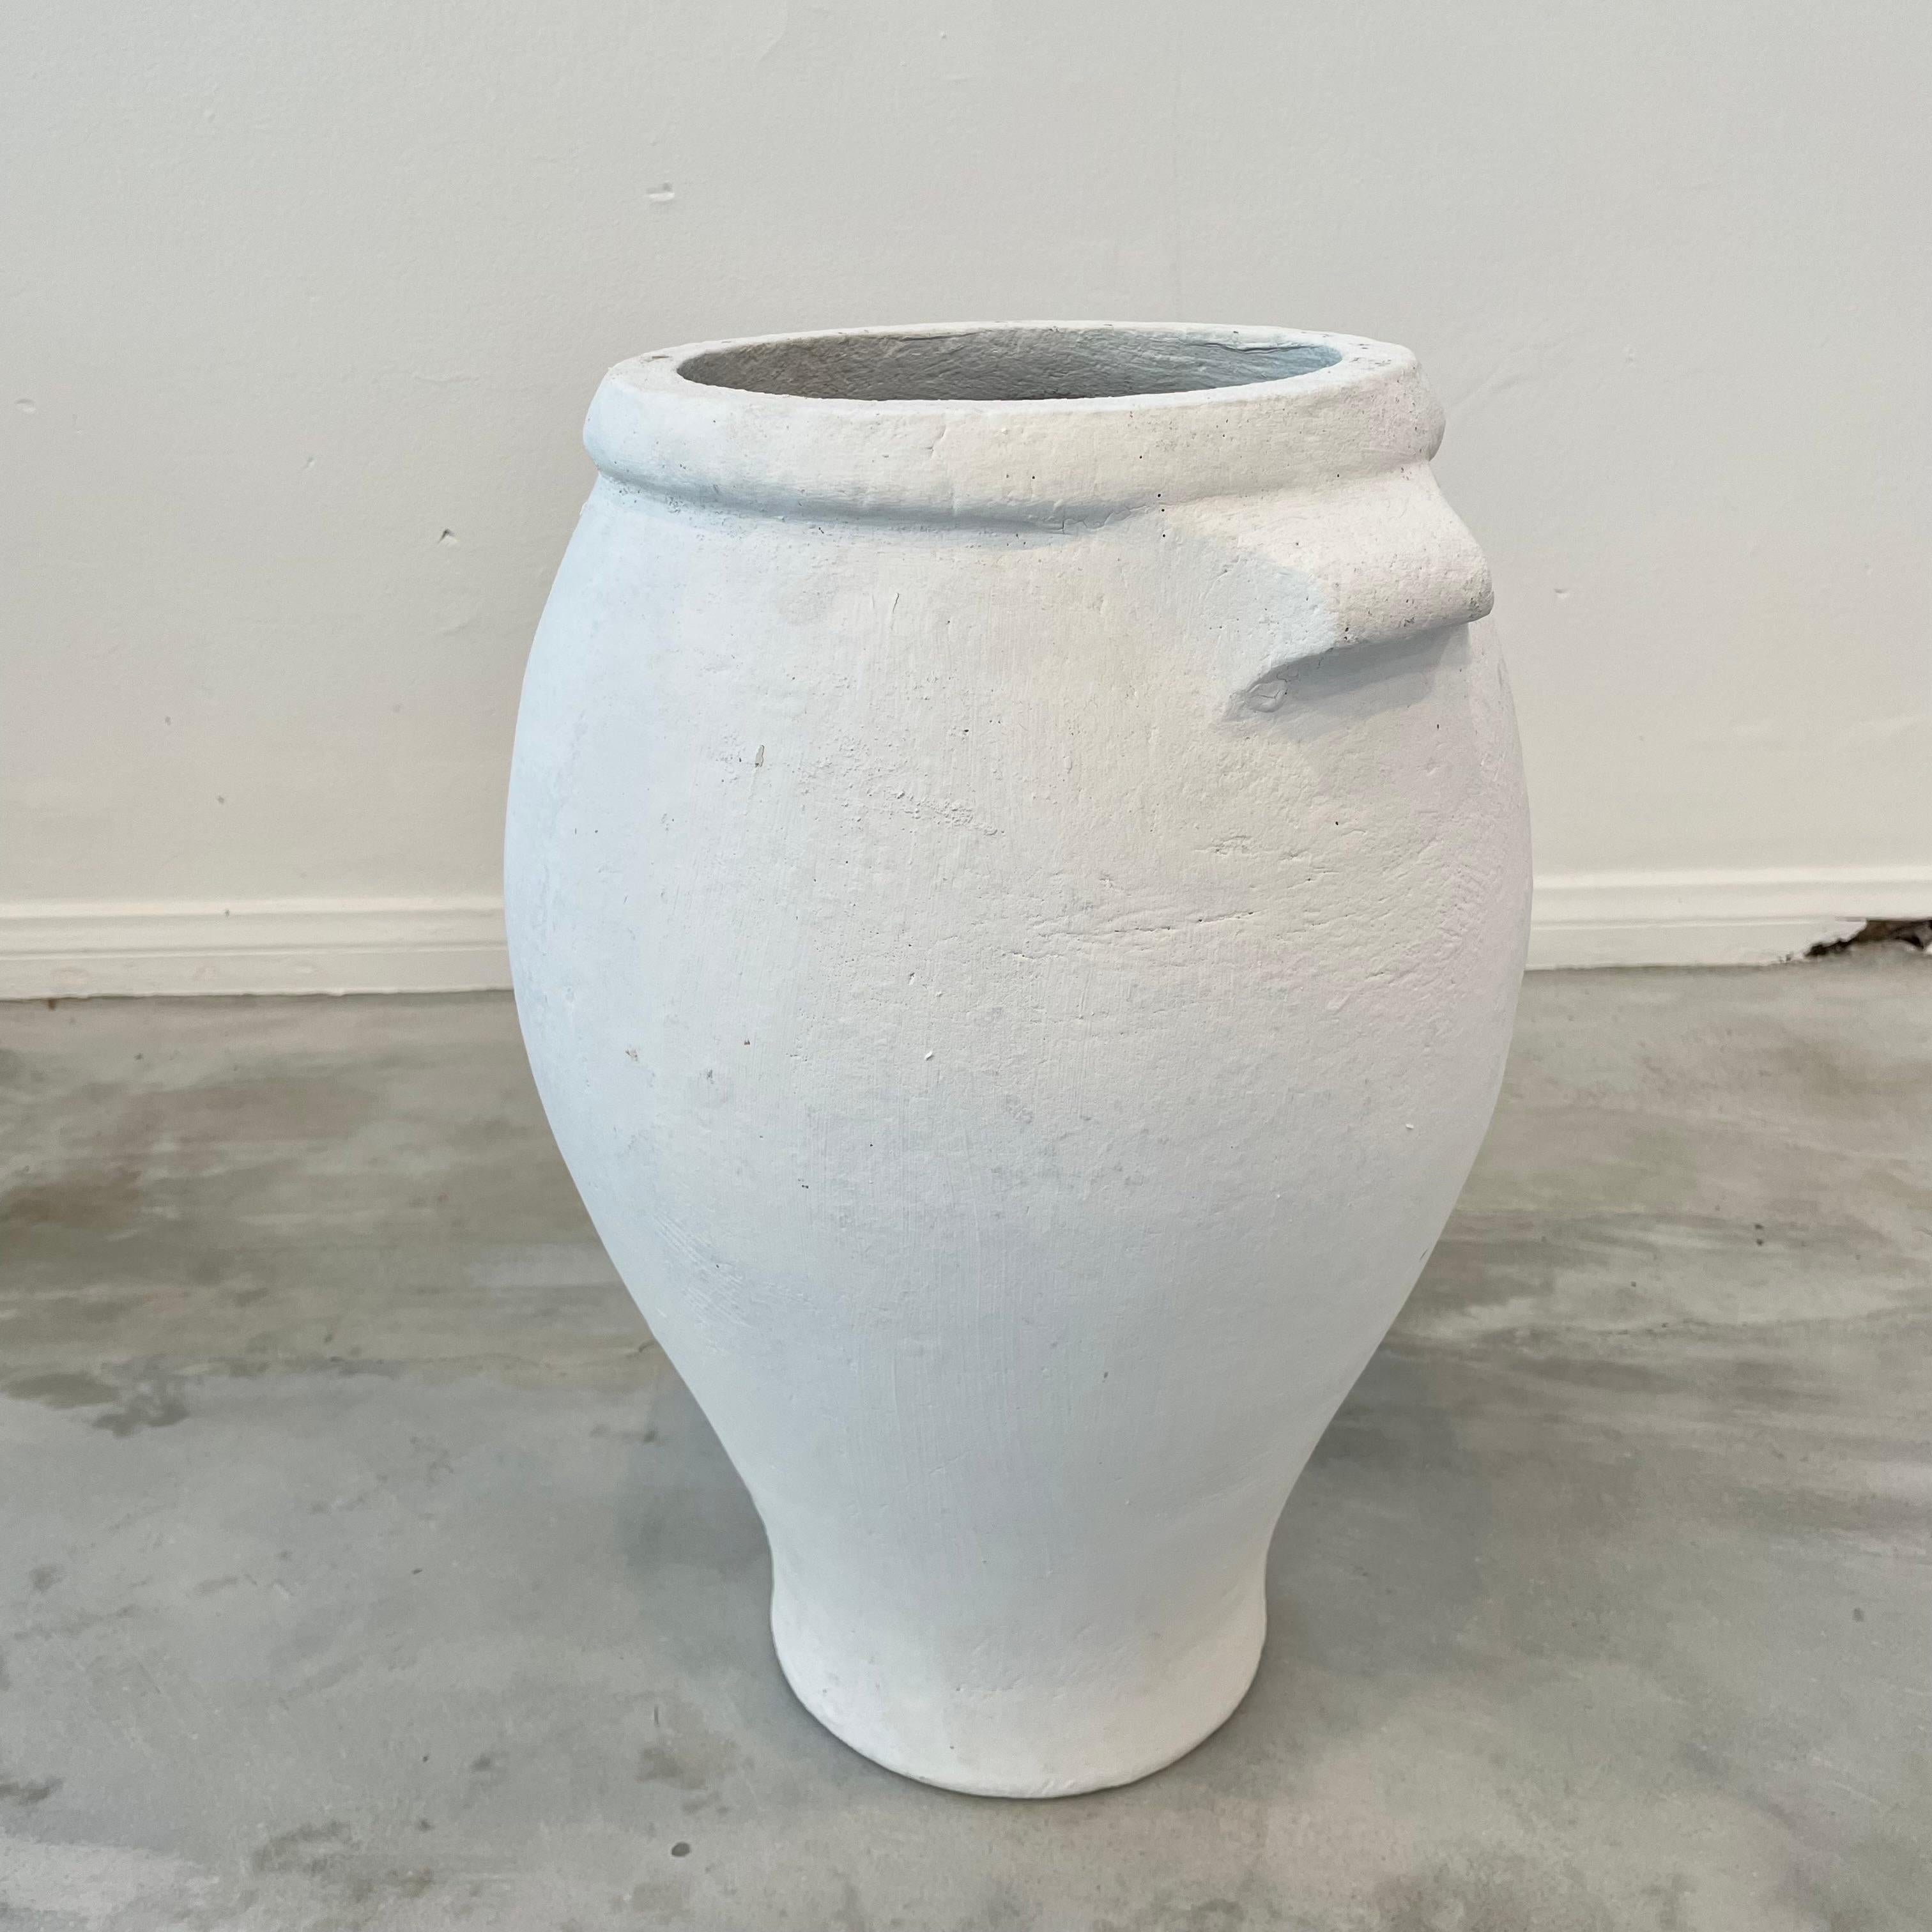 Concrete urn by Willy Guhl in a heavy matte white paint. Urn has a delicate cement ridge around the mouth and two handles right under the upper rim. The body of the jar tapers down to the bottom. Great vintage condition. Only one available.